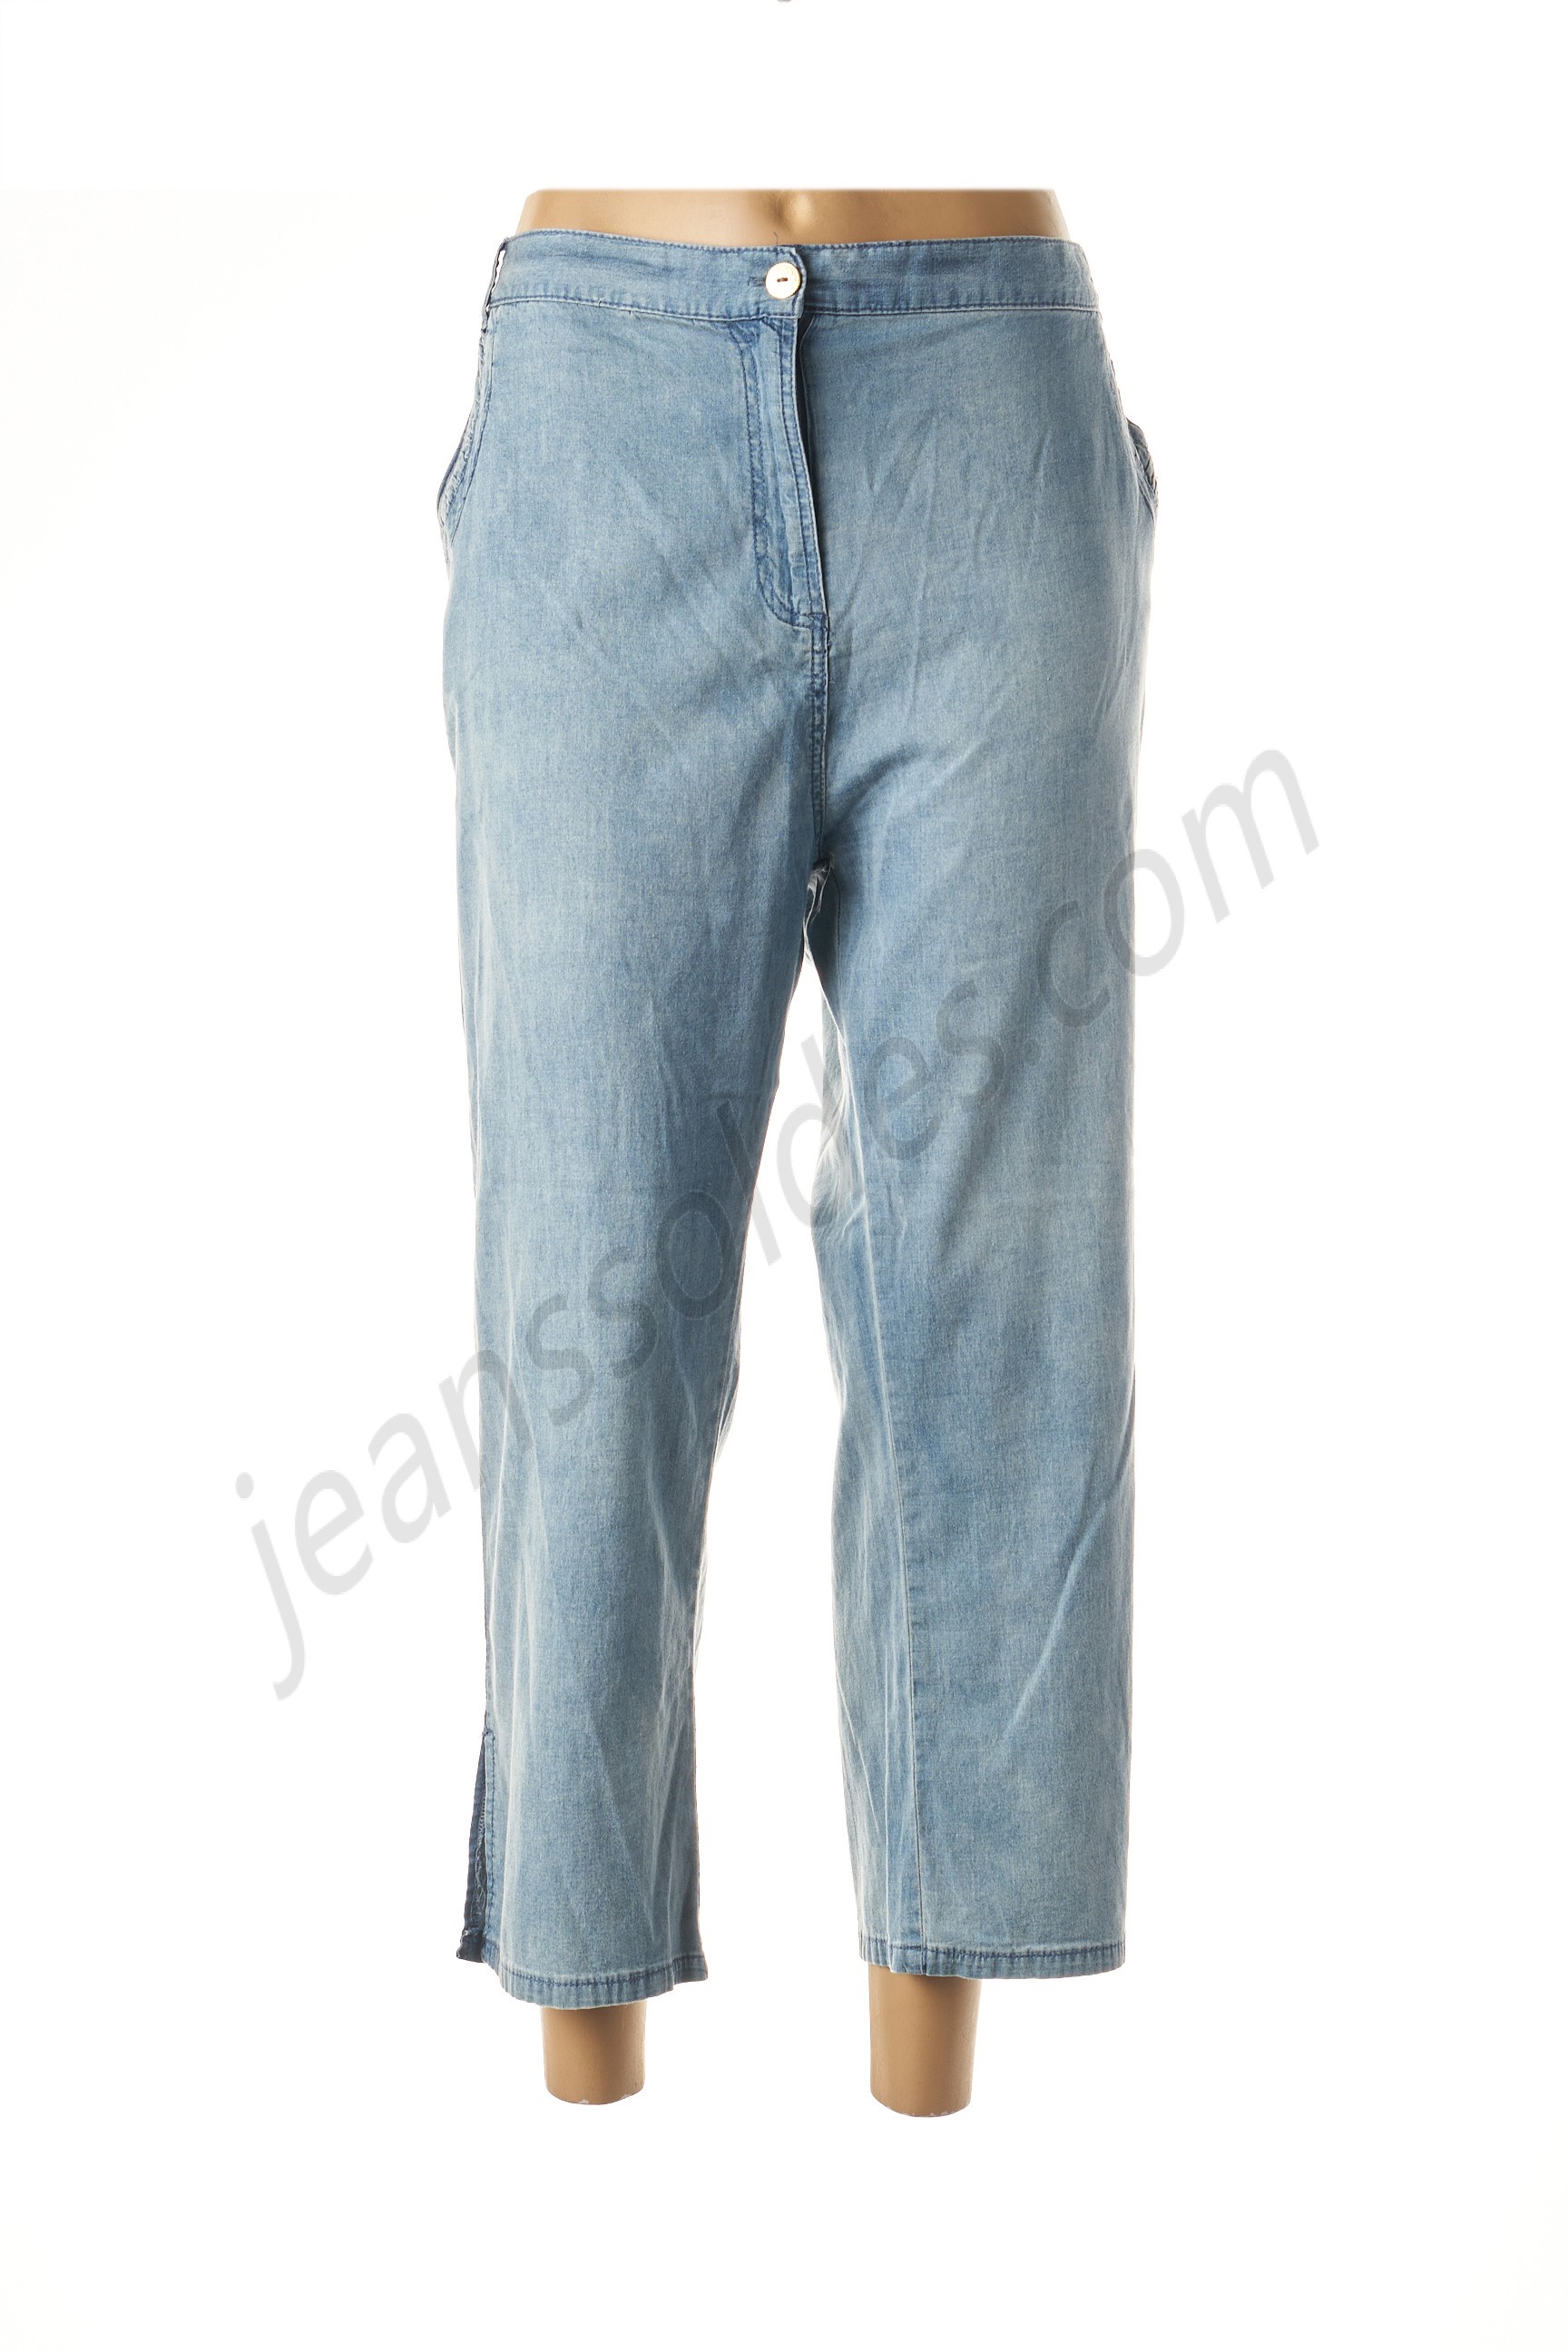 be the queen-Jeans coupe slim prix d’amis - be the queen-Jeans coupe slim prix d’amis